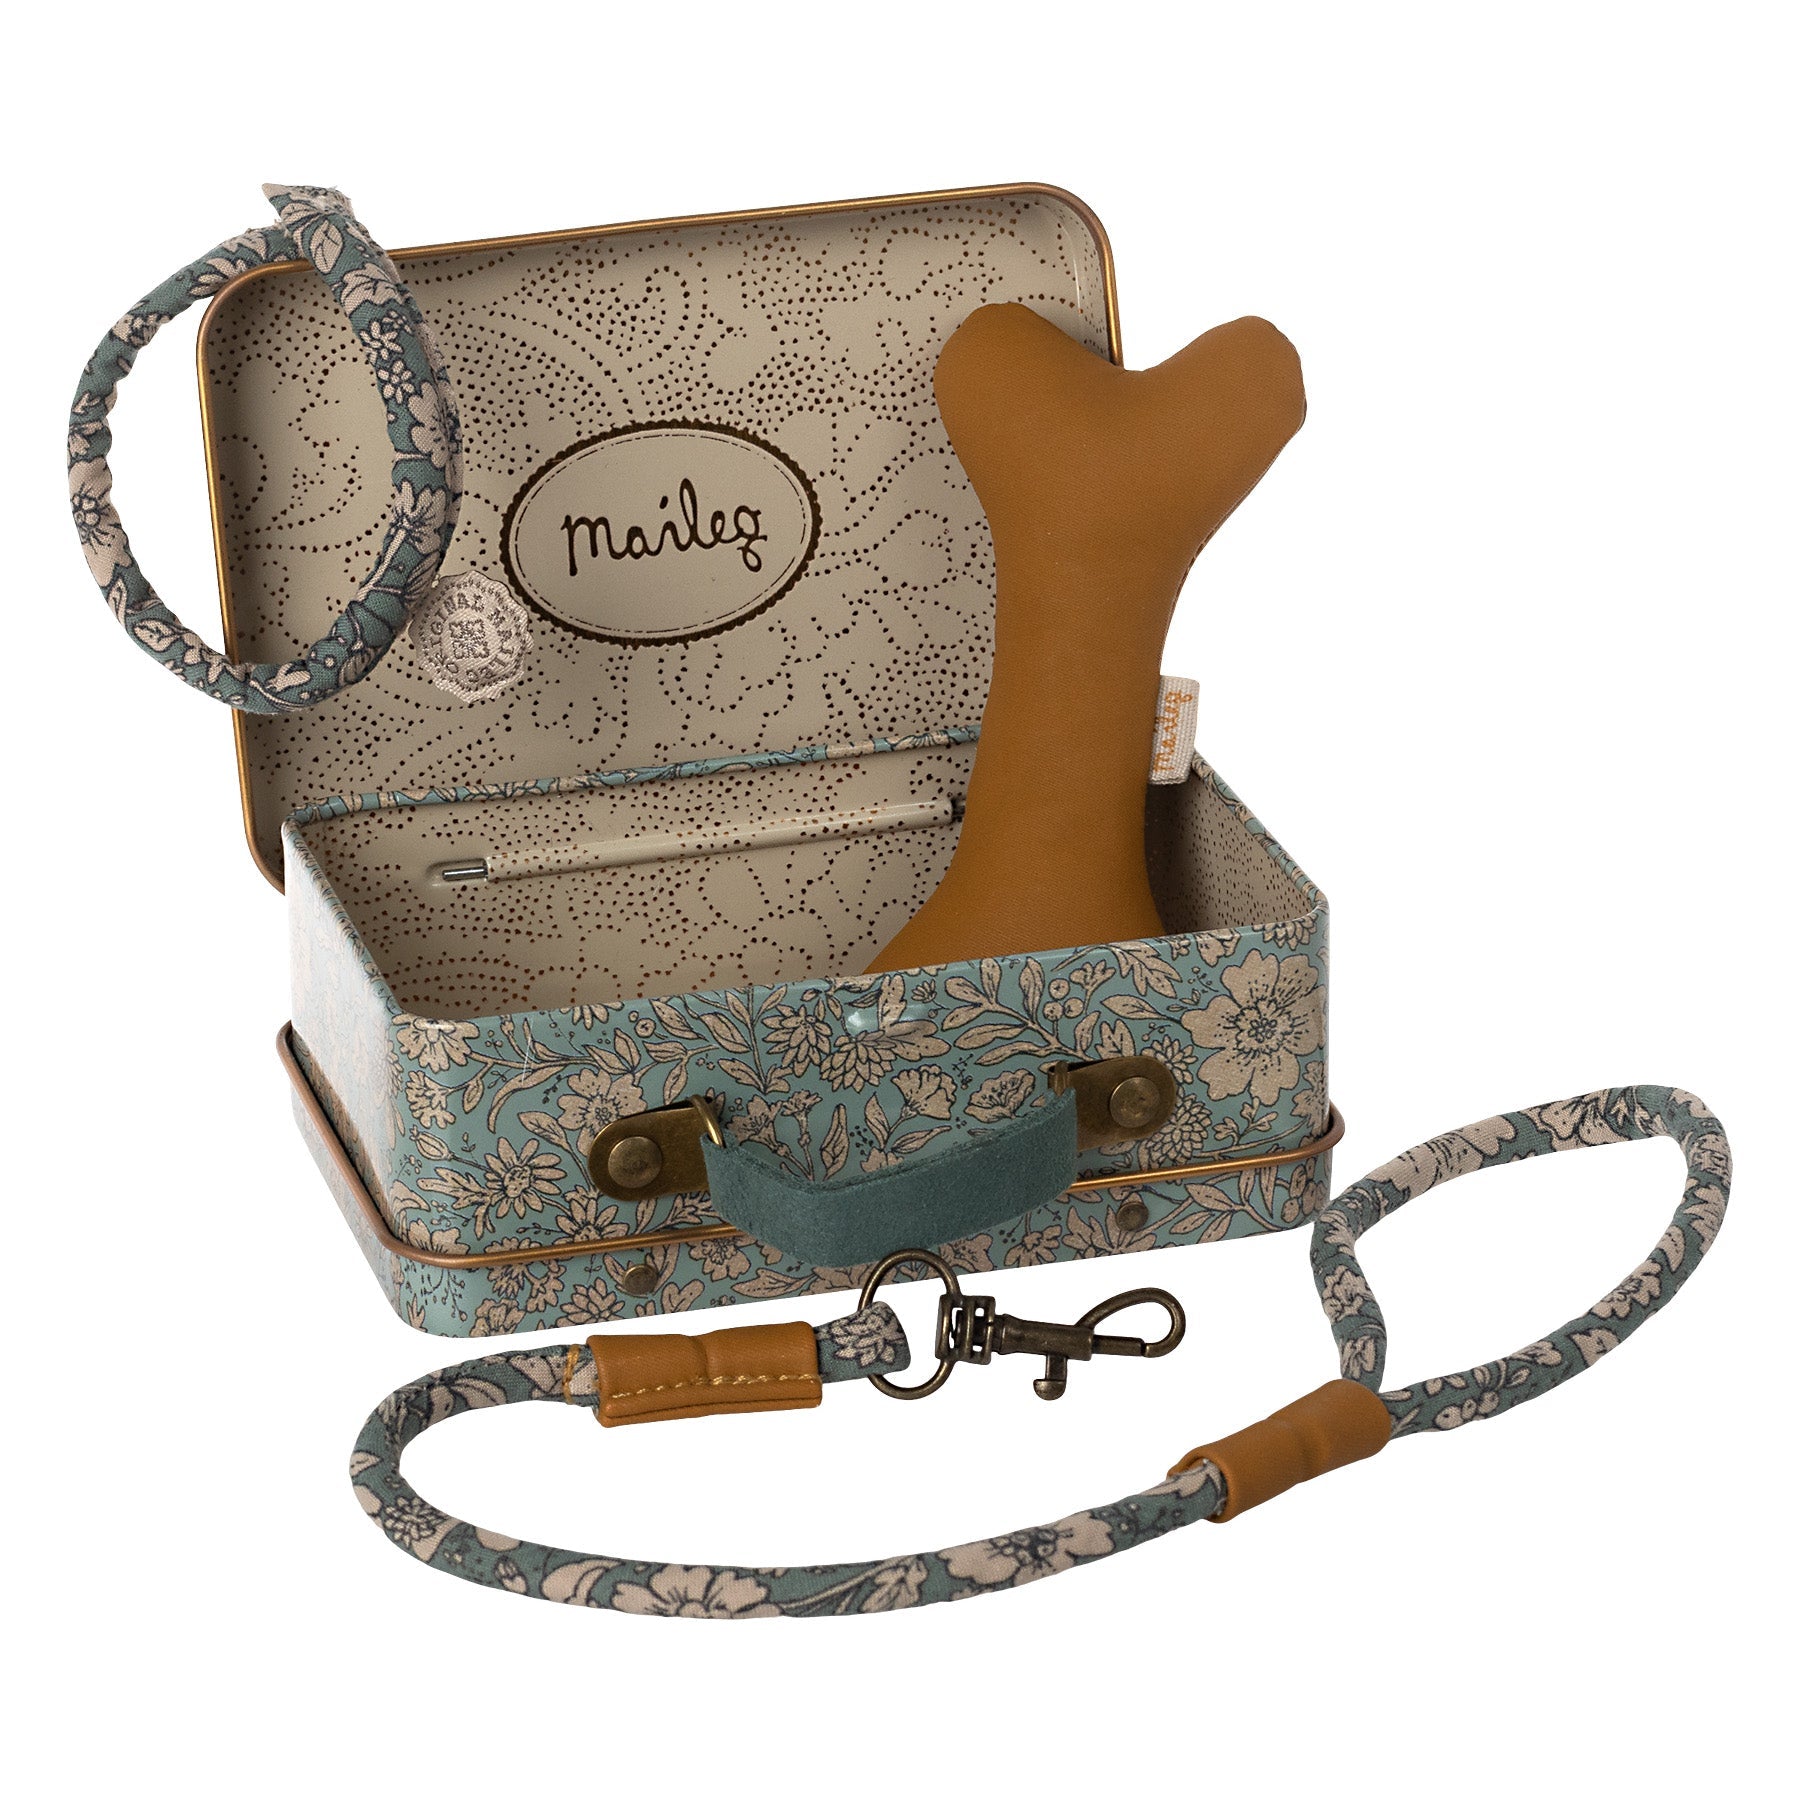 maileg little metal case in blue full of plush dog accessories - a collar, lead and bone